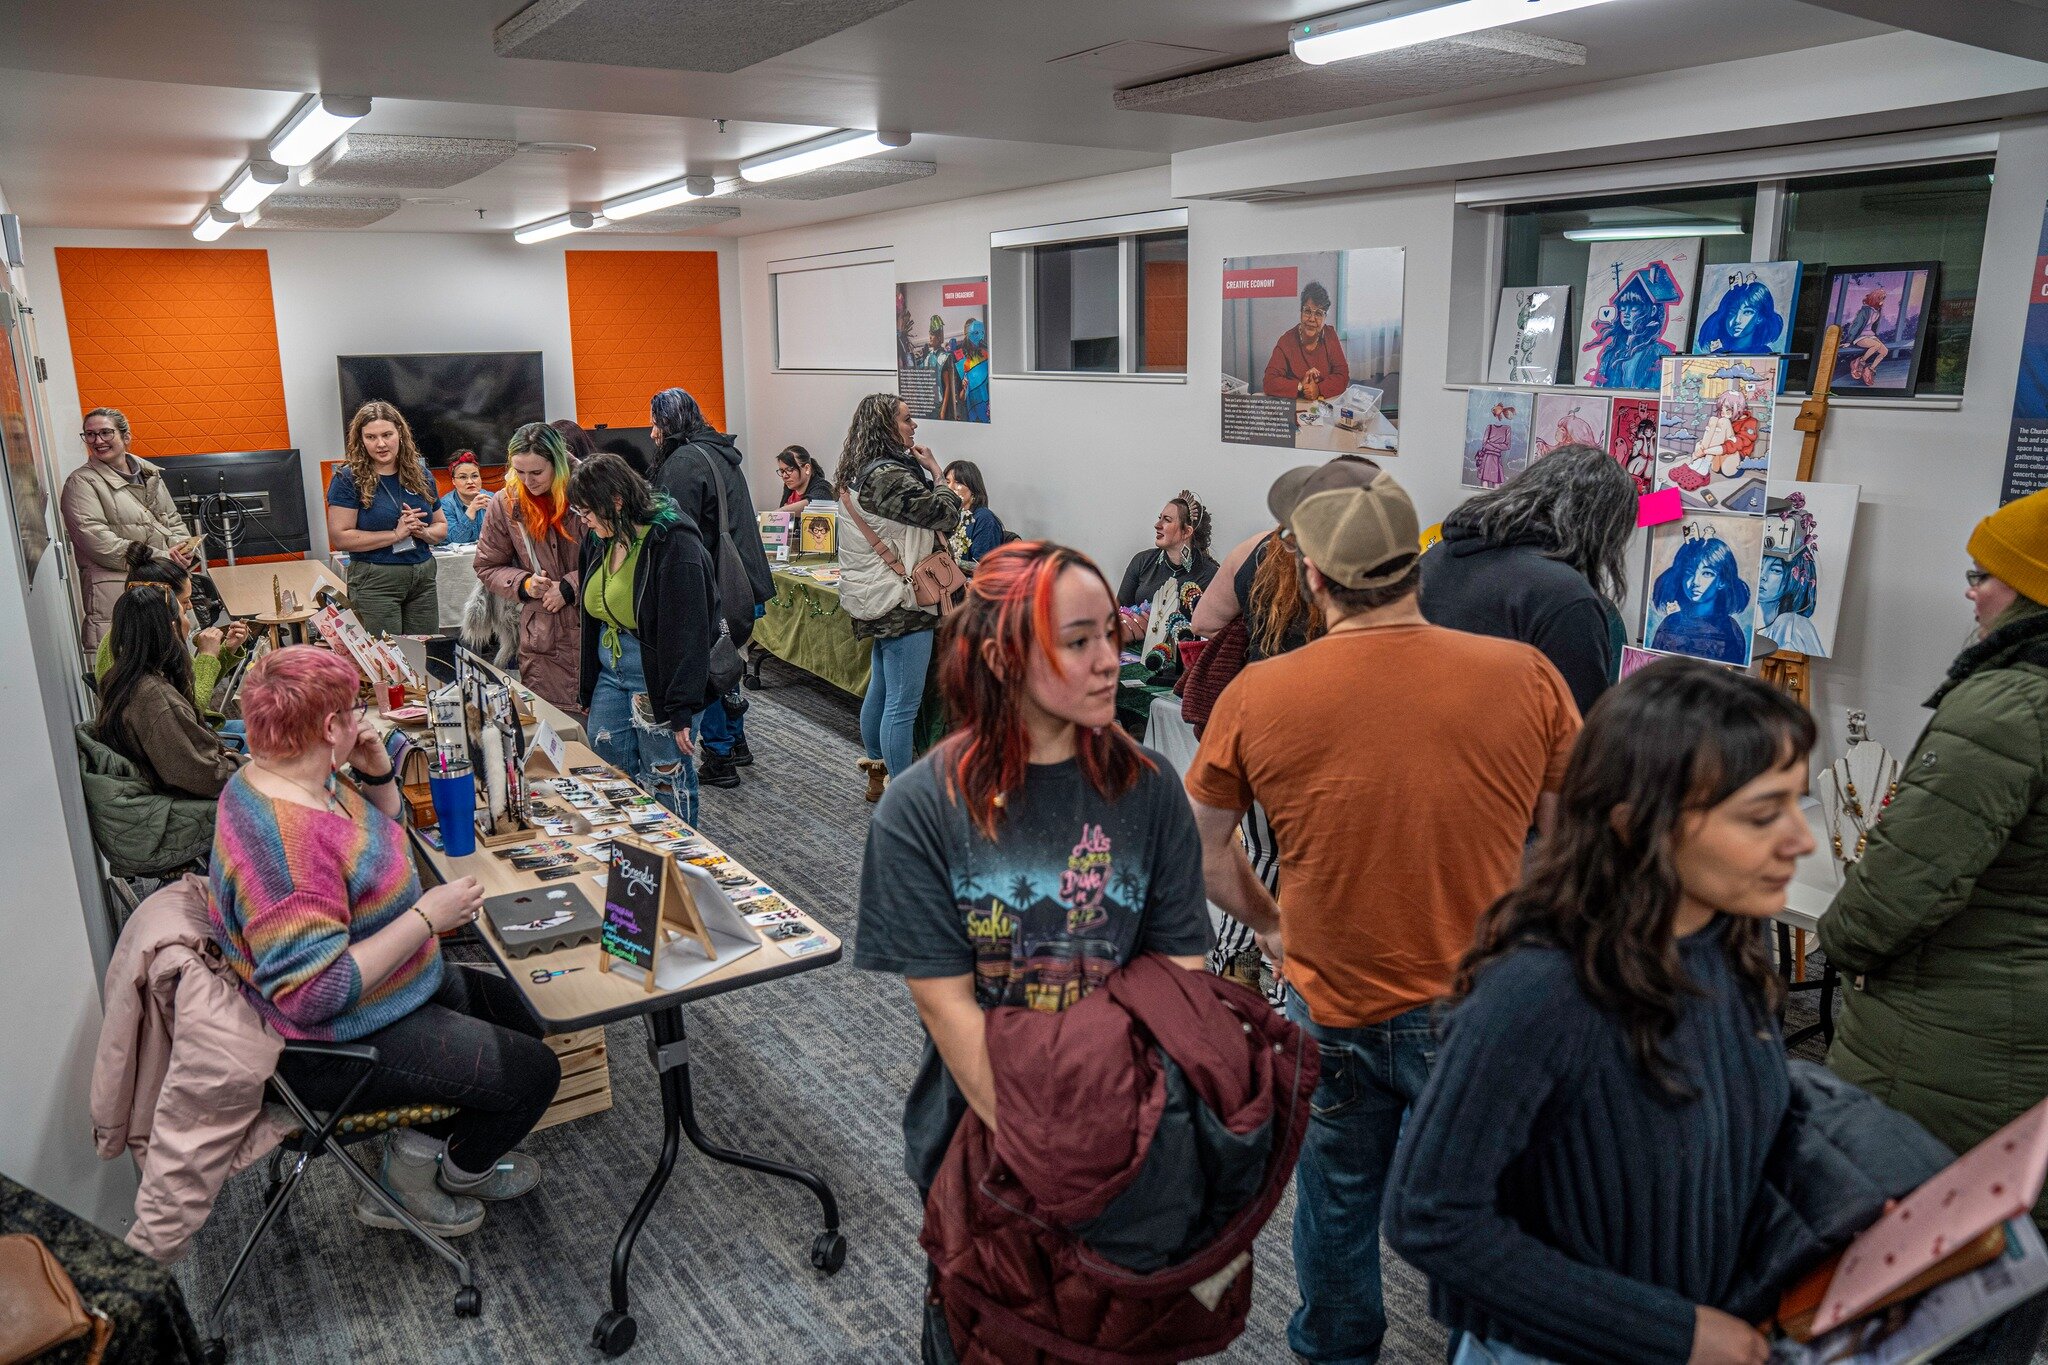 ✨SpenART Crawl 2024 Appreciation Post (2/3): VENDOR VILLAGE! 
All photos by Michael Conti @contiphotos. 
✨ Local artists, vendors, and culture-bearers gathered at The Nave to create VENDOR VILLAGE, curated by @spenard2ndsaturday Artist Coordinator @k